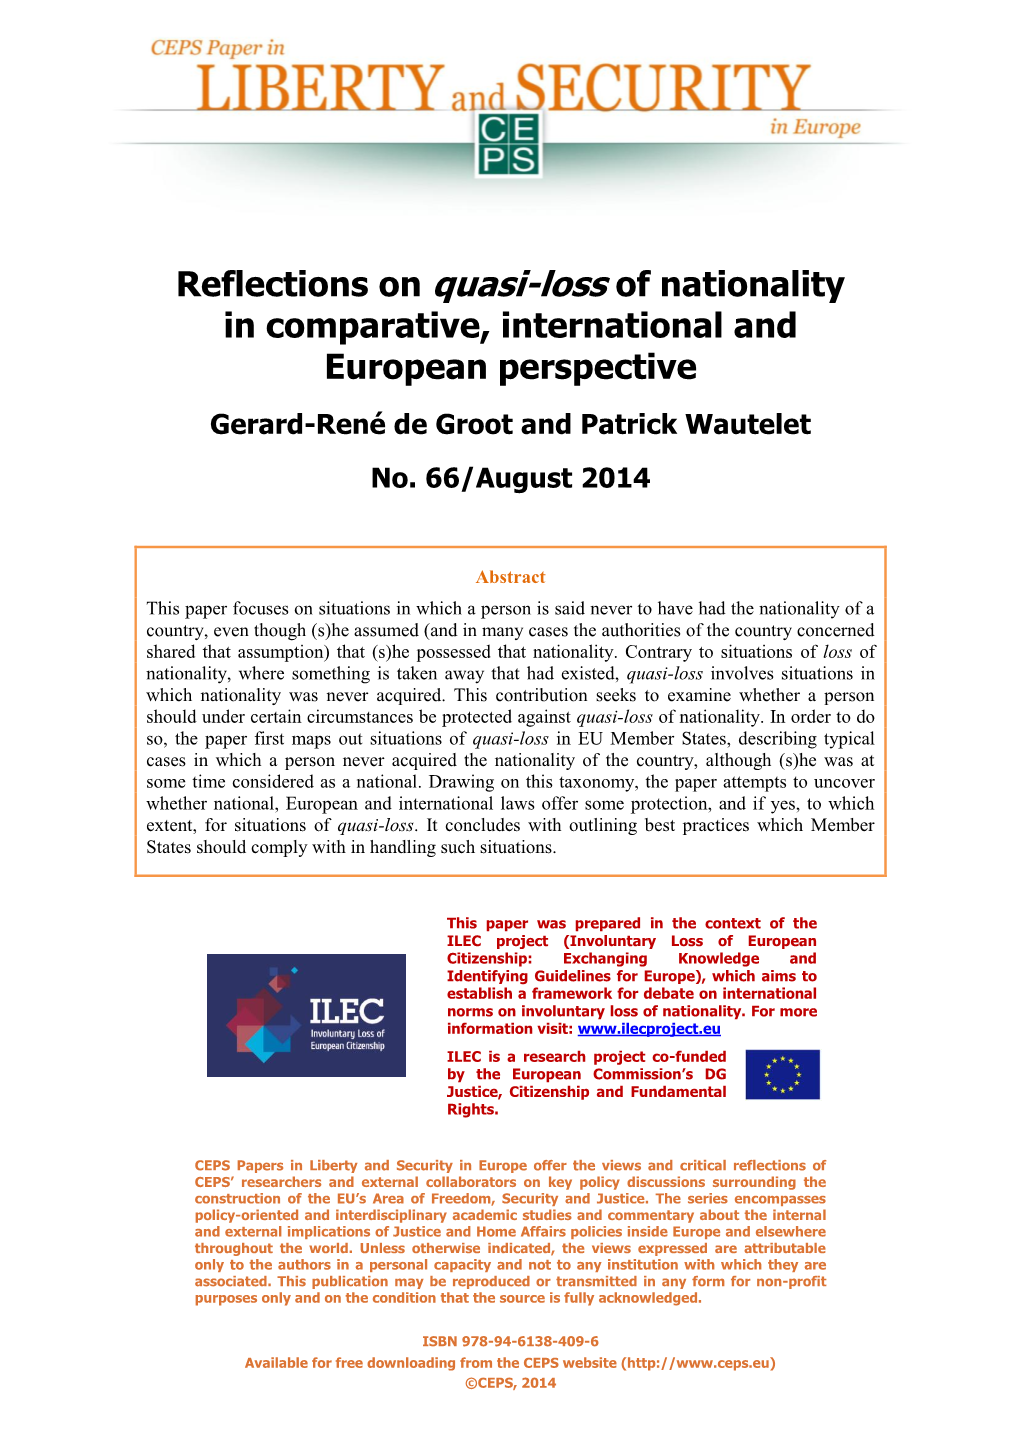 Reflections on Quasi-Loss of Nationality in Comparative, International and European Perspective Gerard-René De Groot and Patrick Wautelet No